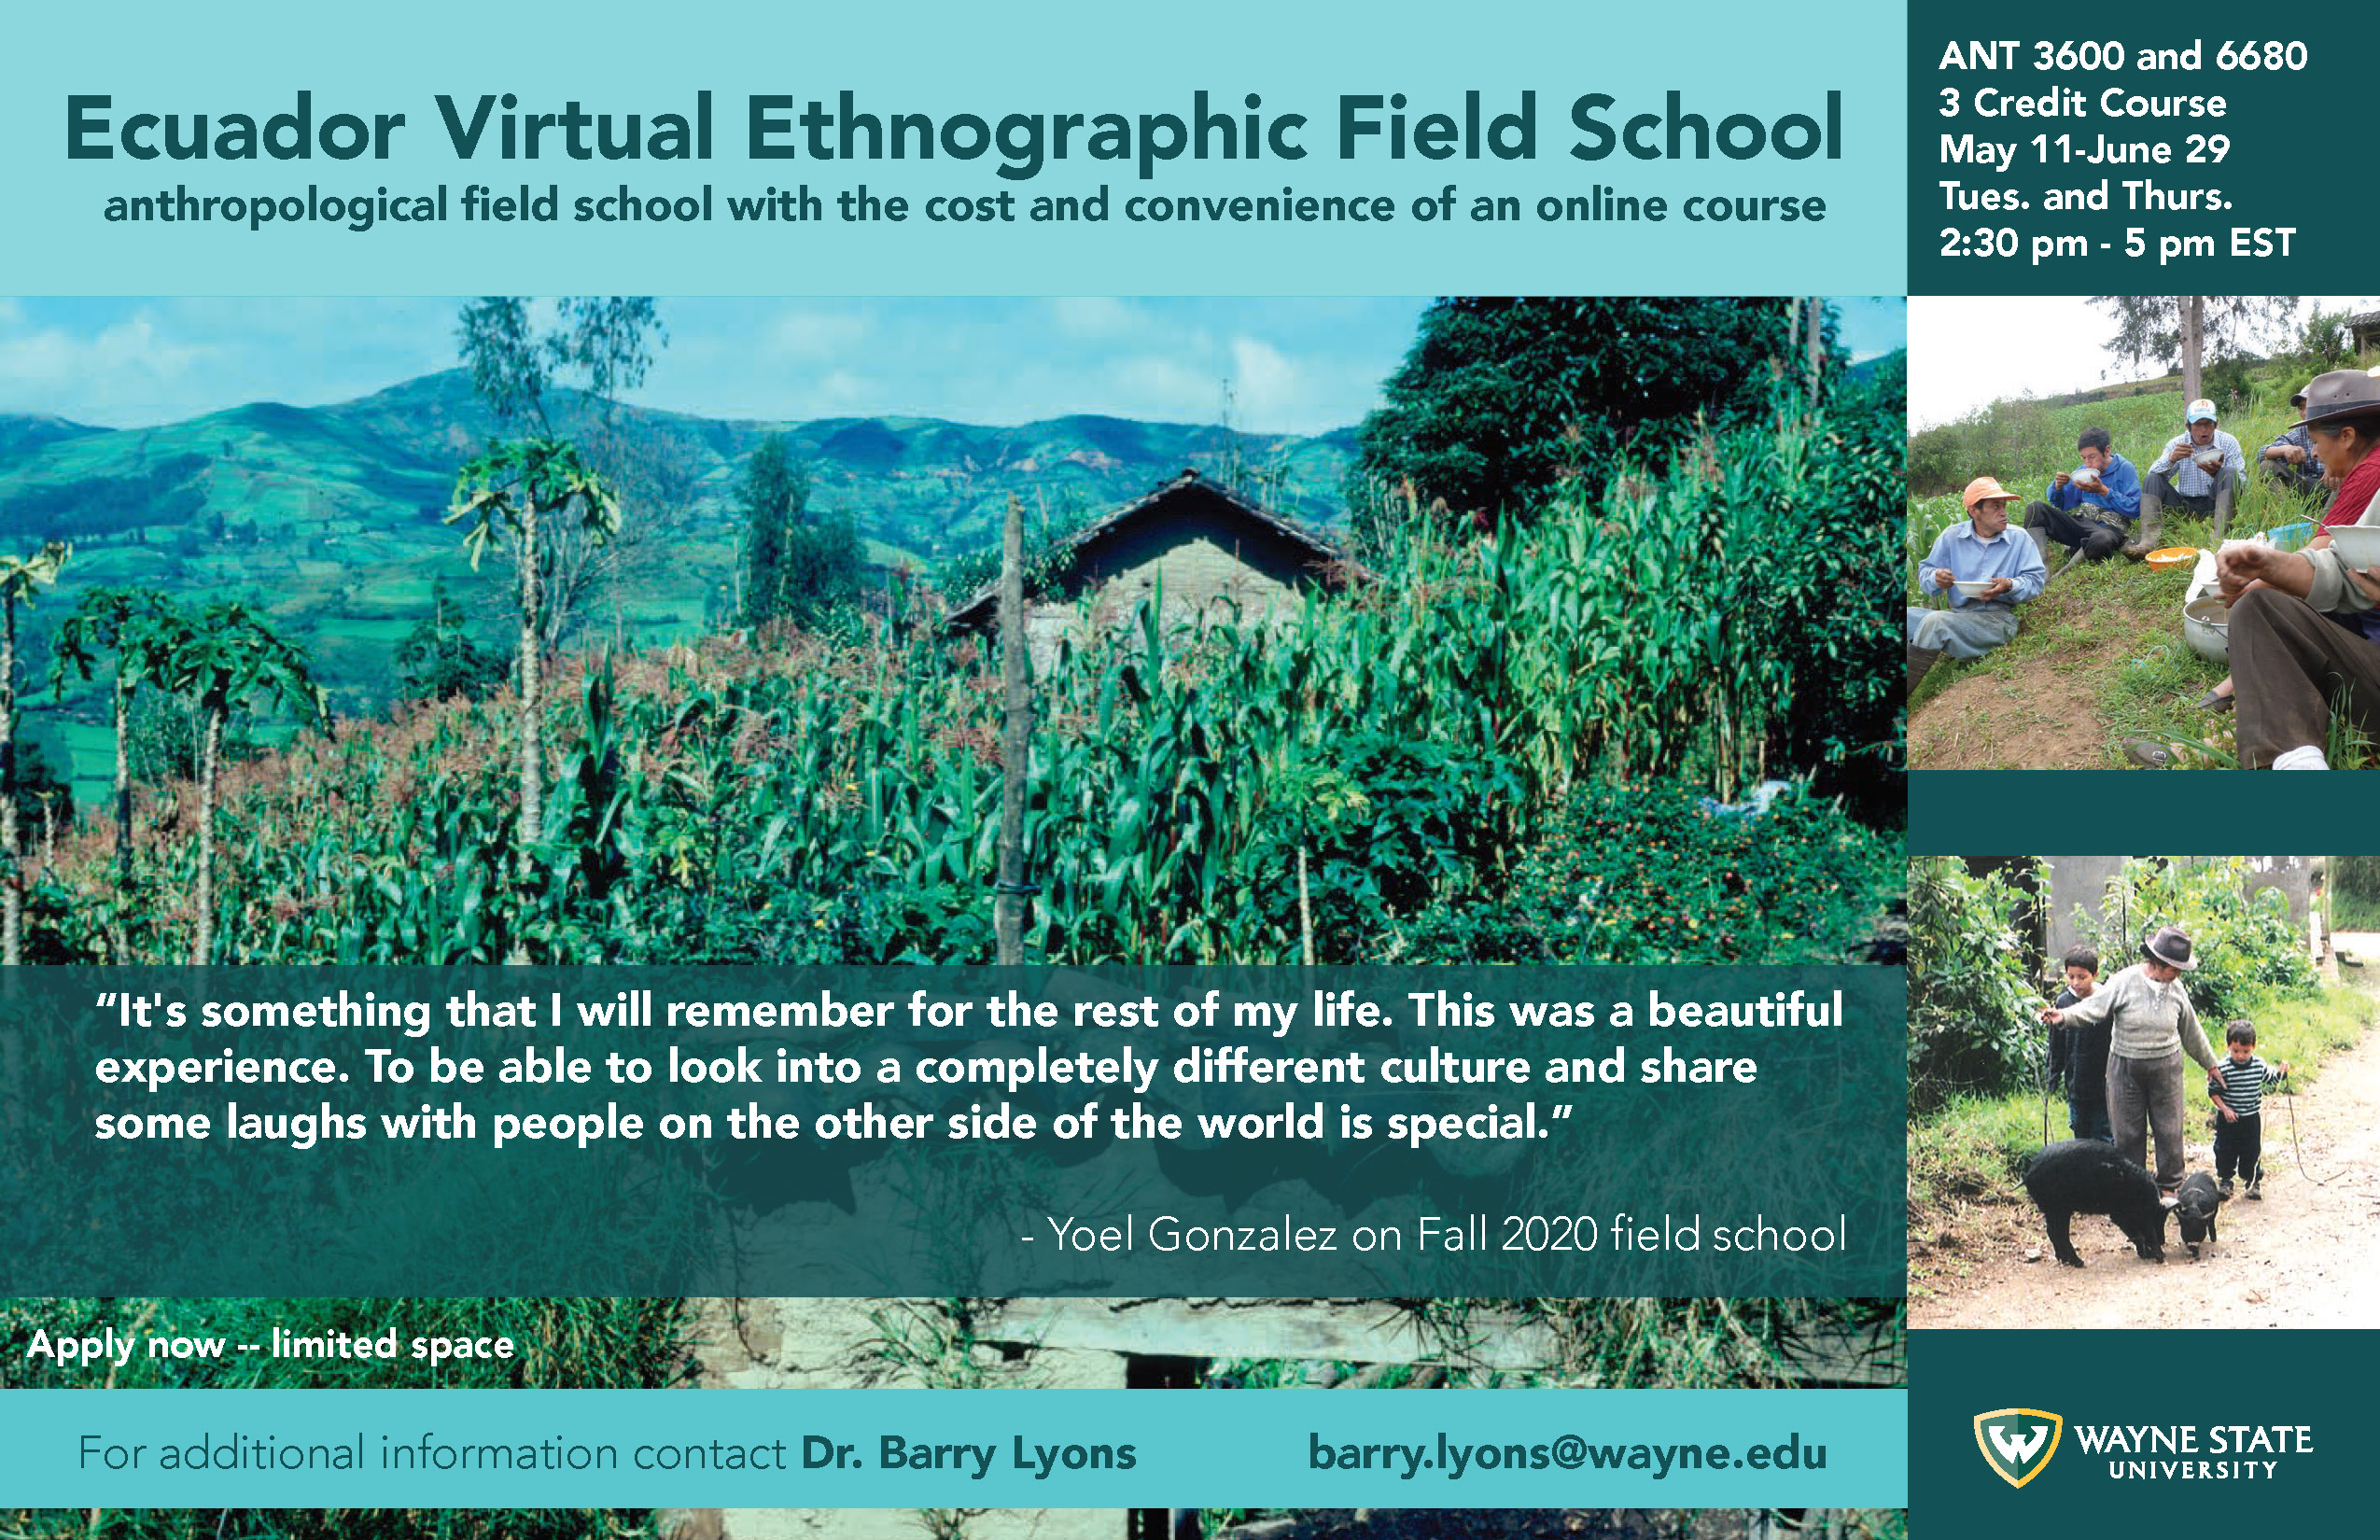 Ecuador Virtual Ethnography Field School. anthropological field school with the cost and convenience of an online course. It's something that I will remember for the rest of my life. This was a beautiful experience. To be able to look into a completely different culture and share some laughs with people on the other side of the world is special Yoel Gonzalez on Fall 2020 field school. Apply now - limitedspace.⁠ For additional information contact Dr. Barry Lyons. barry.lyons@wayne.edu. ⁠